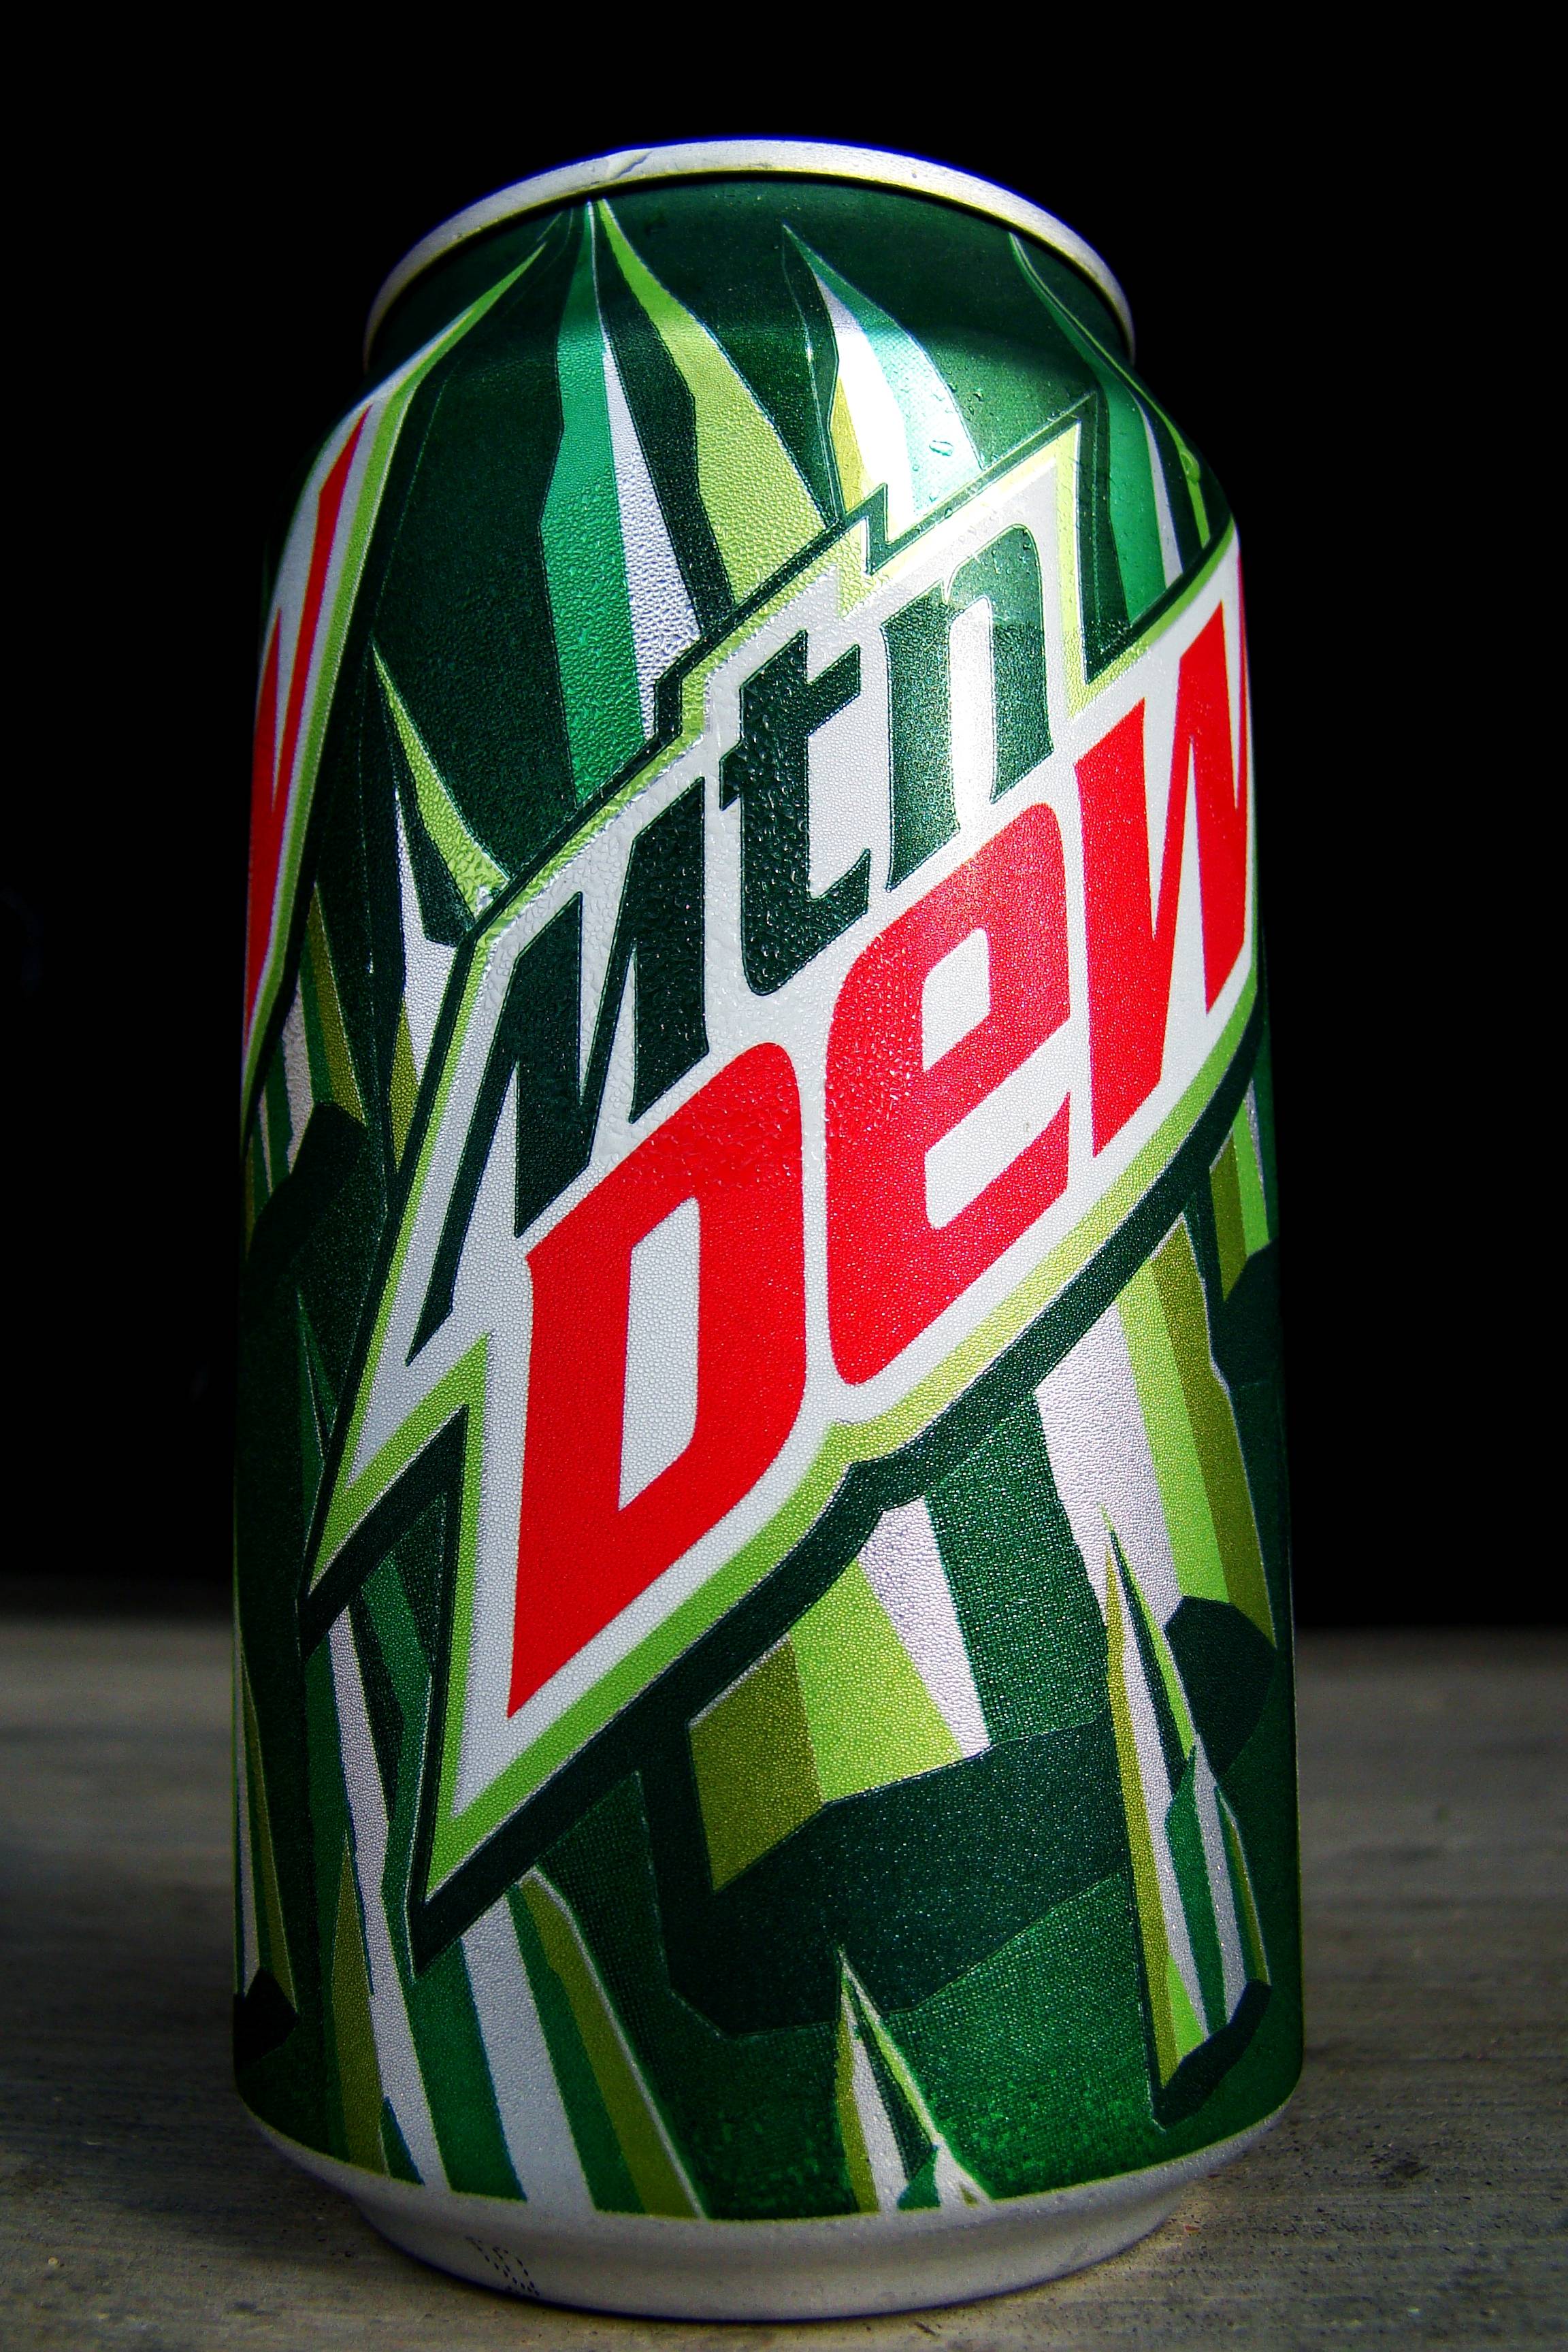 Mountain Dew Wallpapers Hd Image 31 Wide.